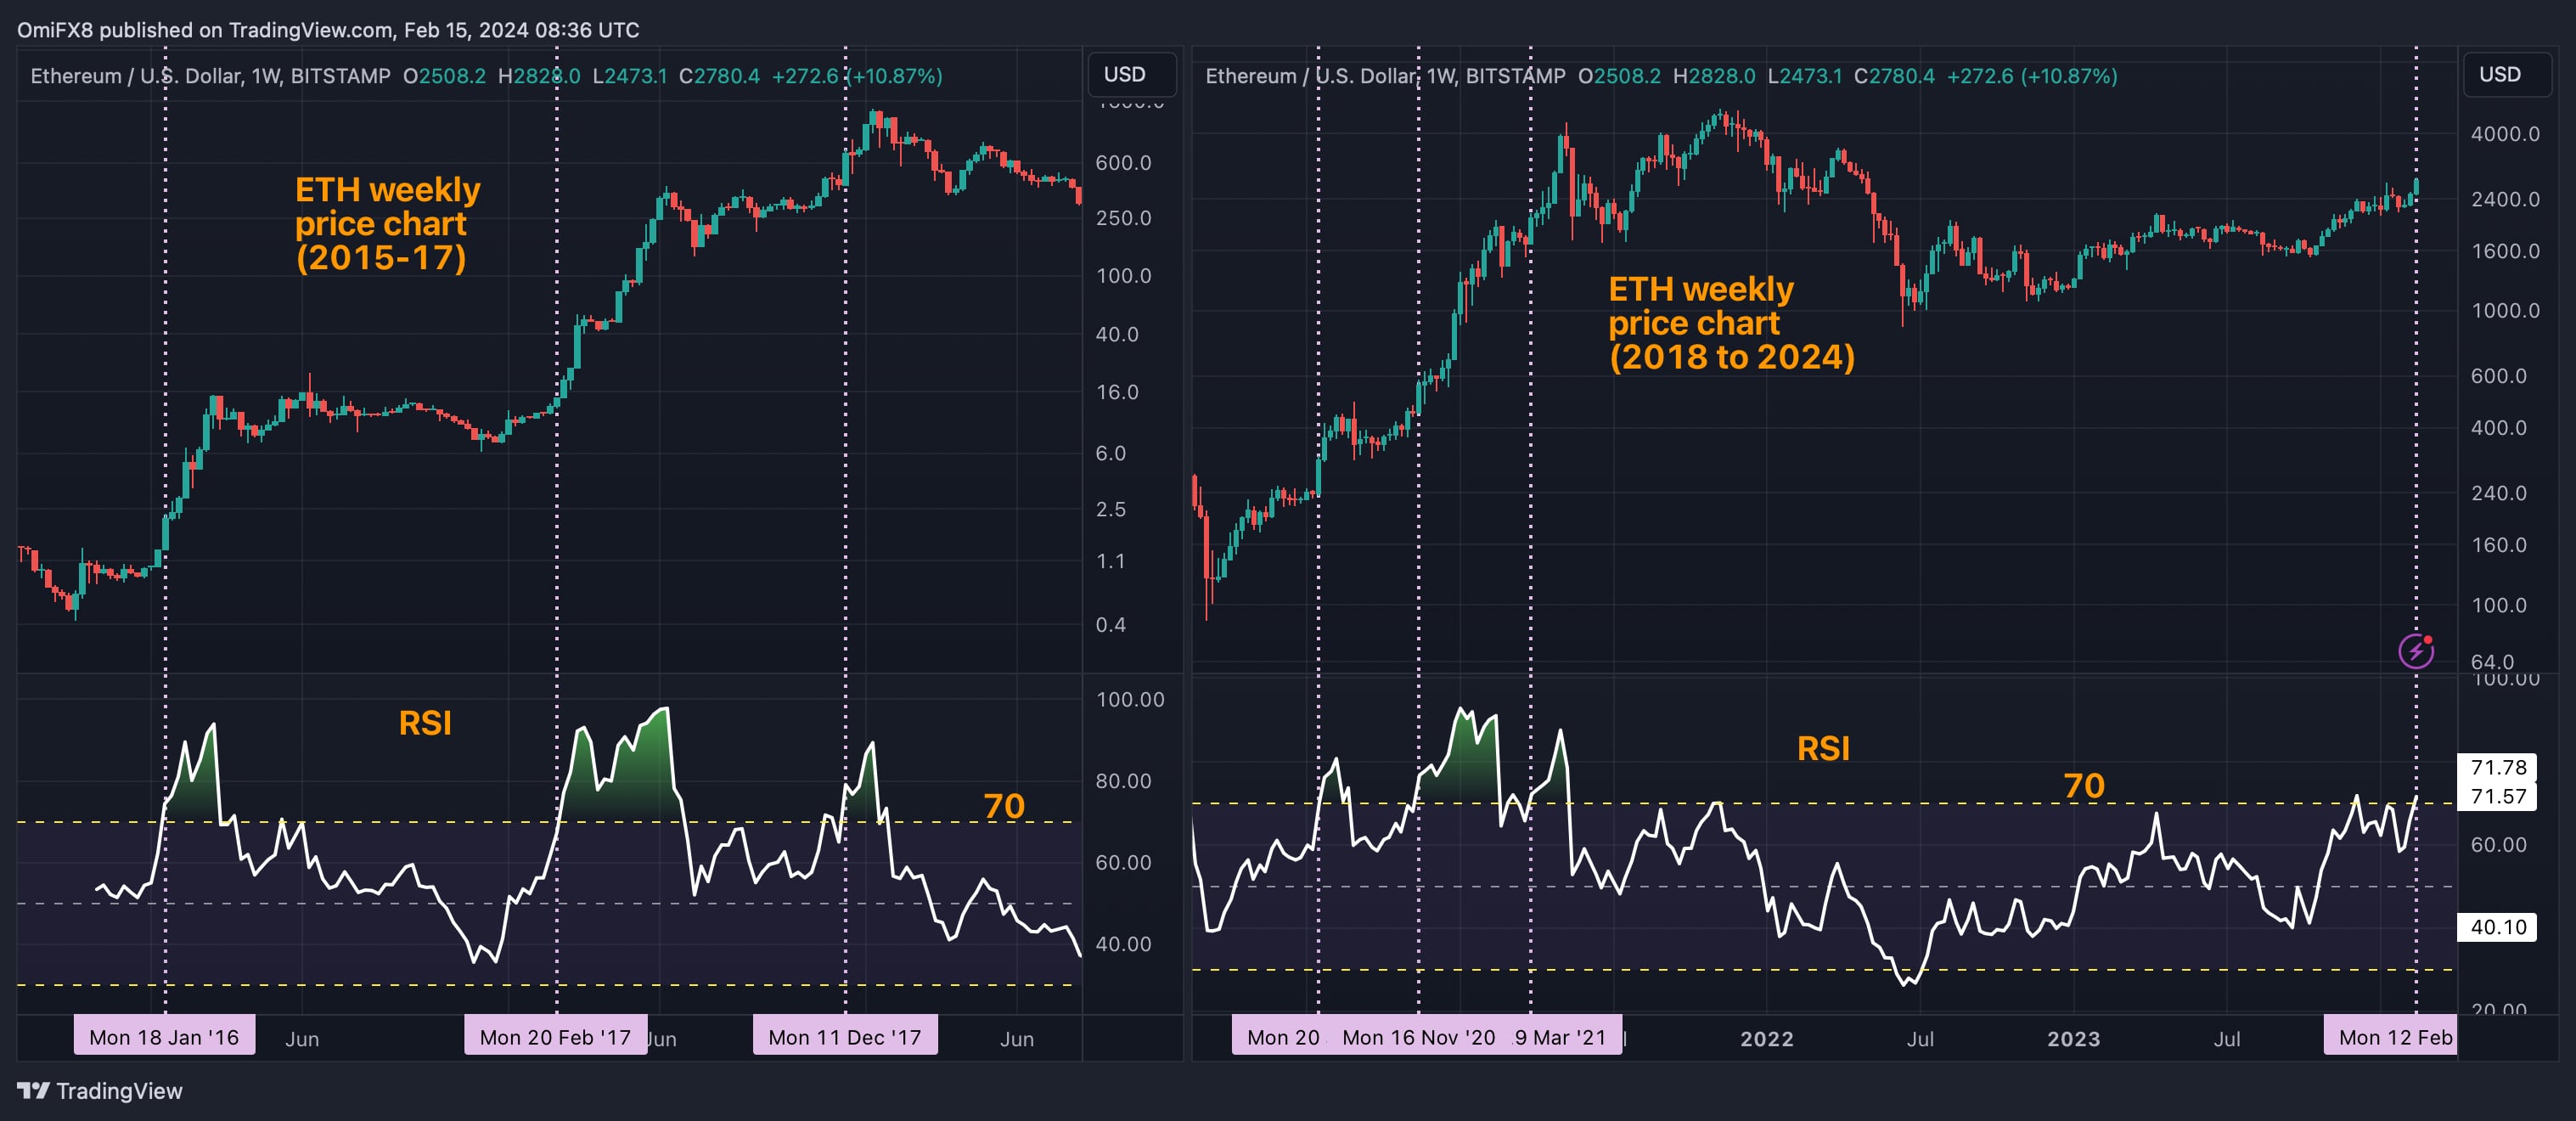 Ether's RSI Warrants Your Attention. Here is Why